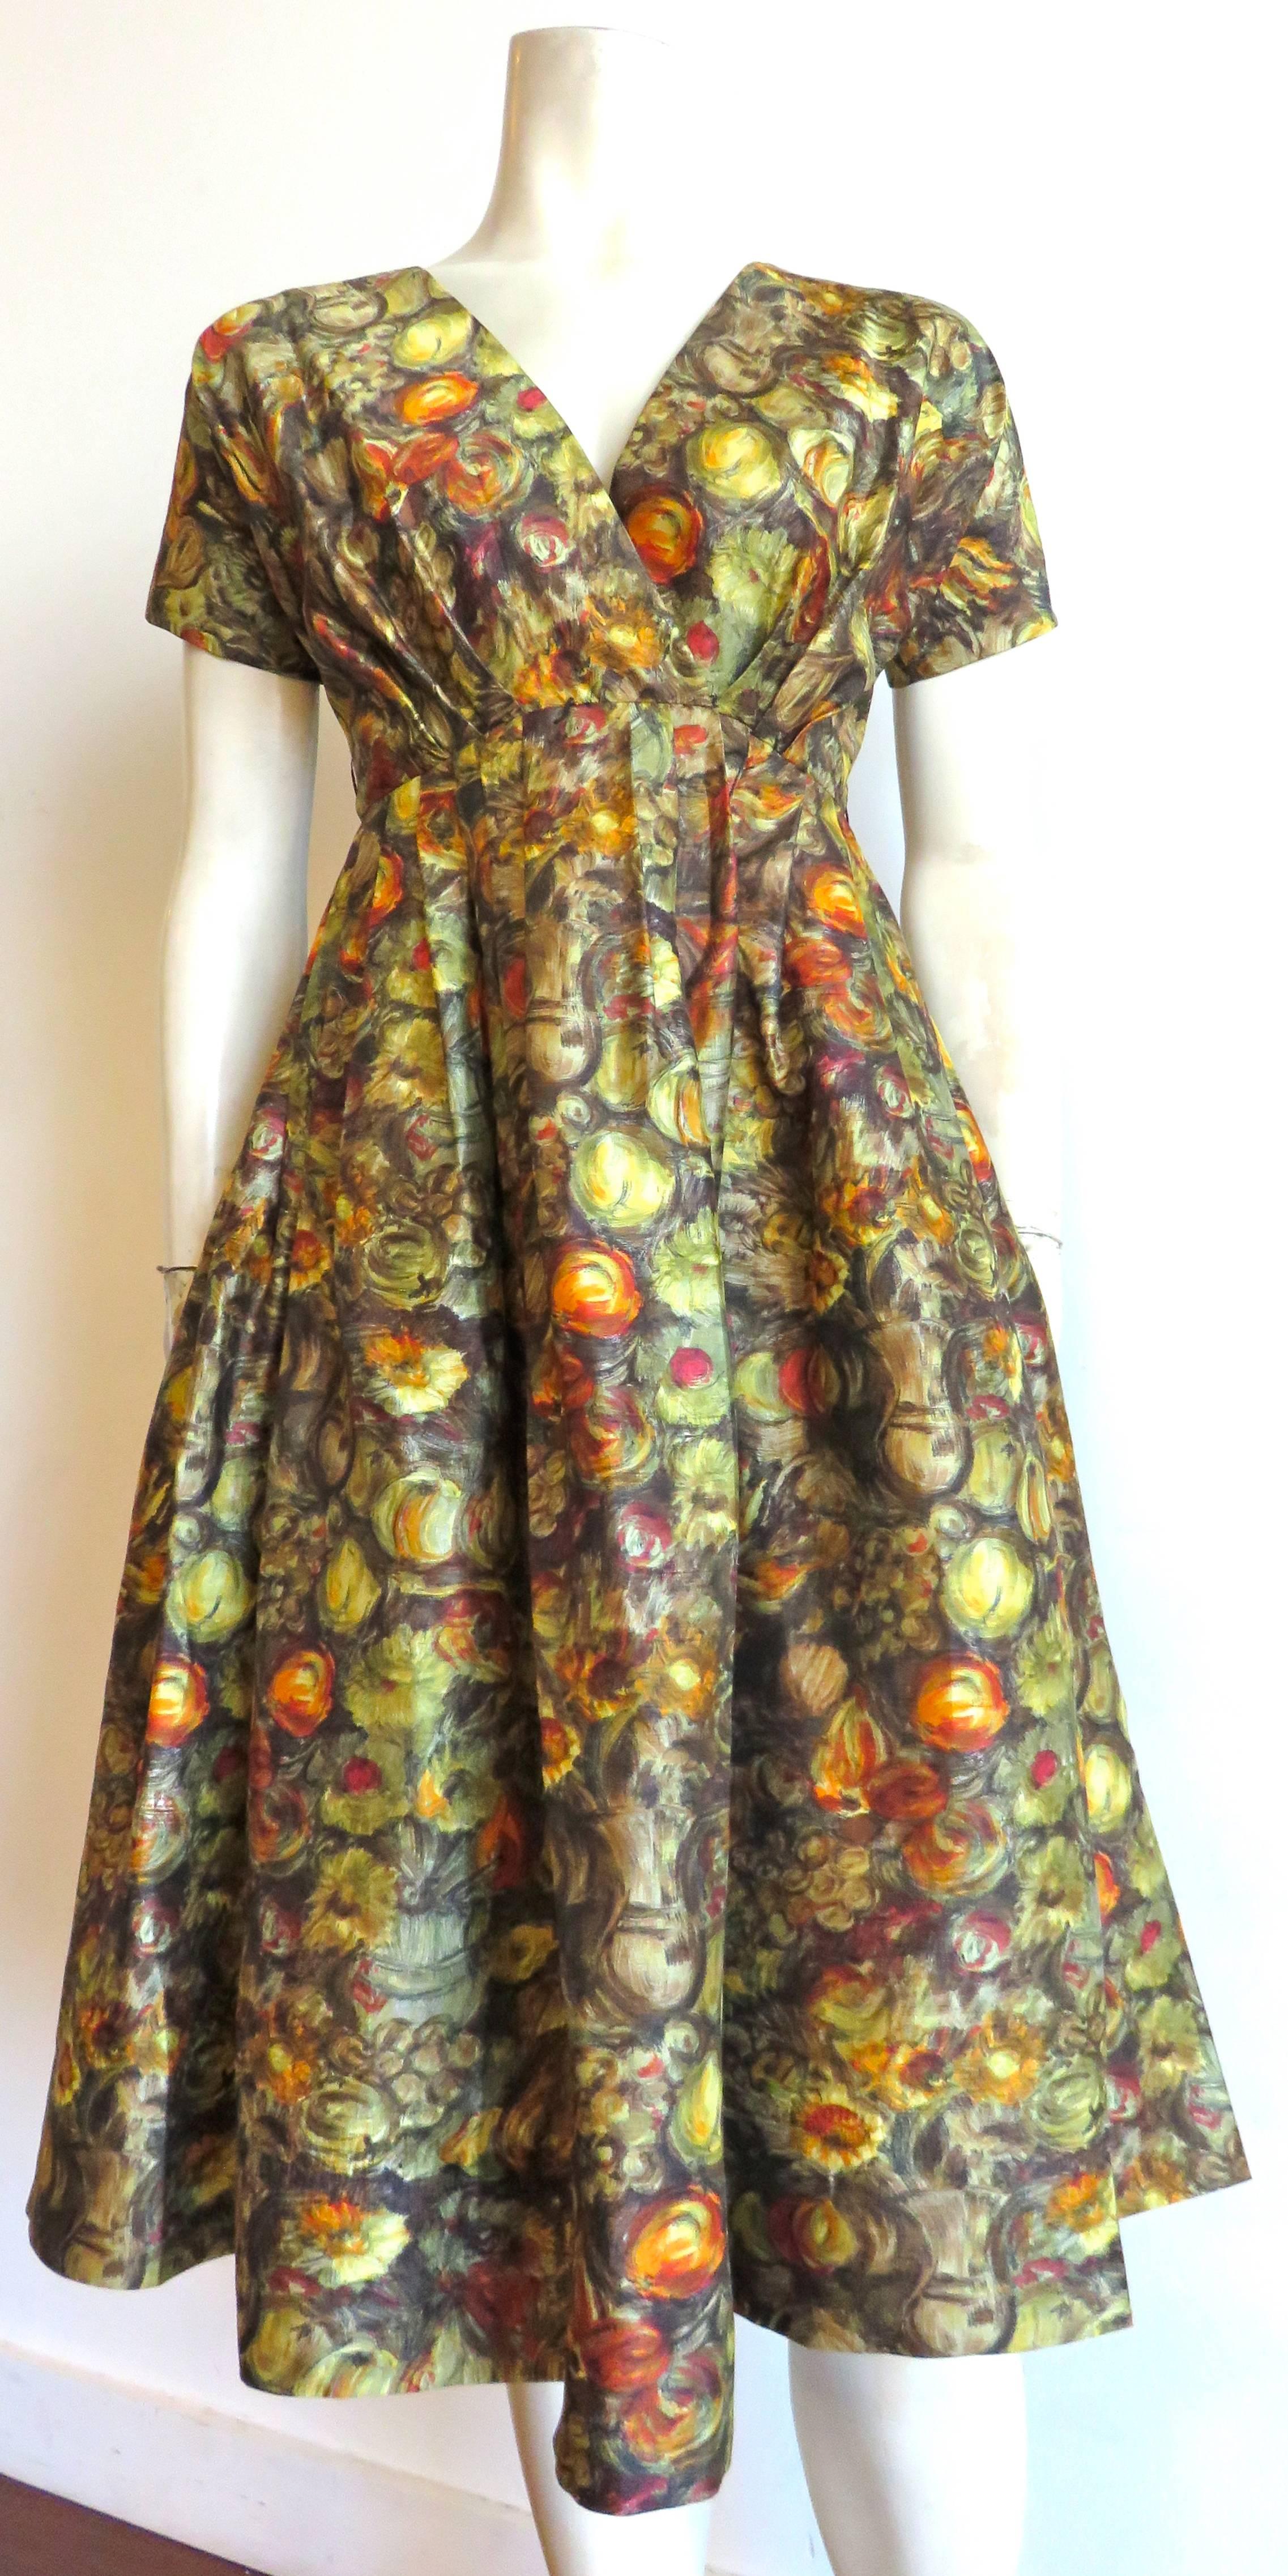 Excellent condition, late 1940's CLAIRE McCARDELL, silk, fruits & flowers cocktail dress.

This stunning dress features an all-over, painted-style, fruits & flowers printed artwork in gorgeous autumnal colors.

Excellent condition, silk